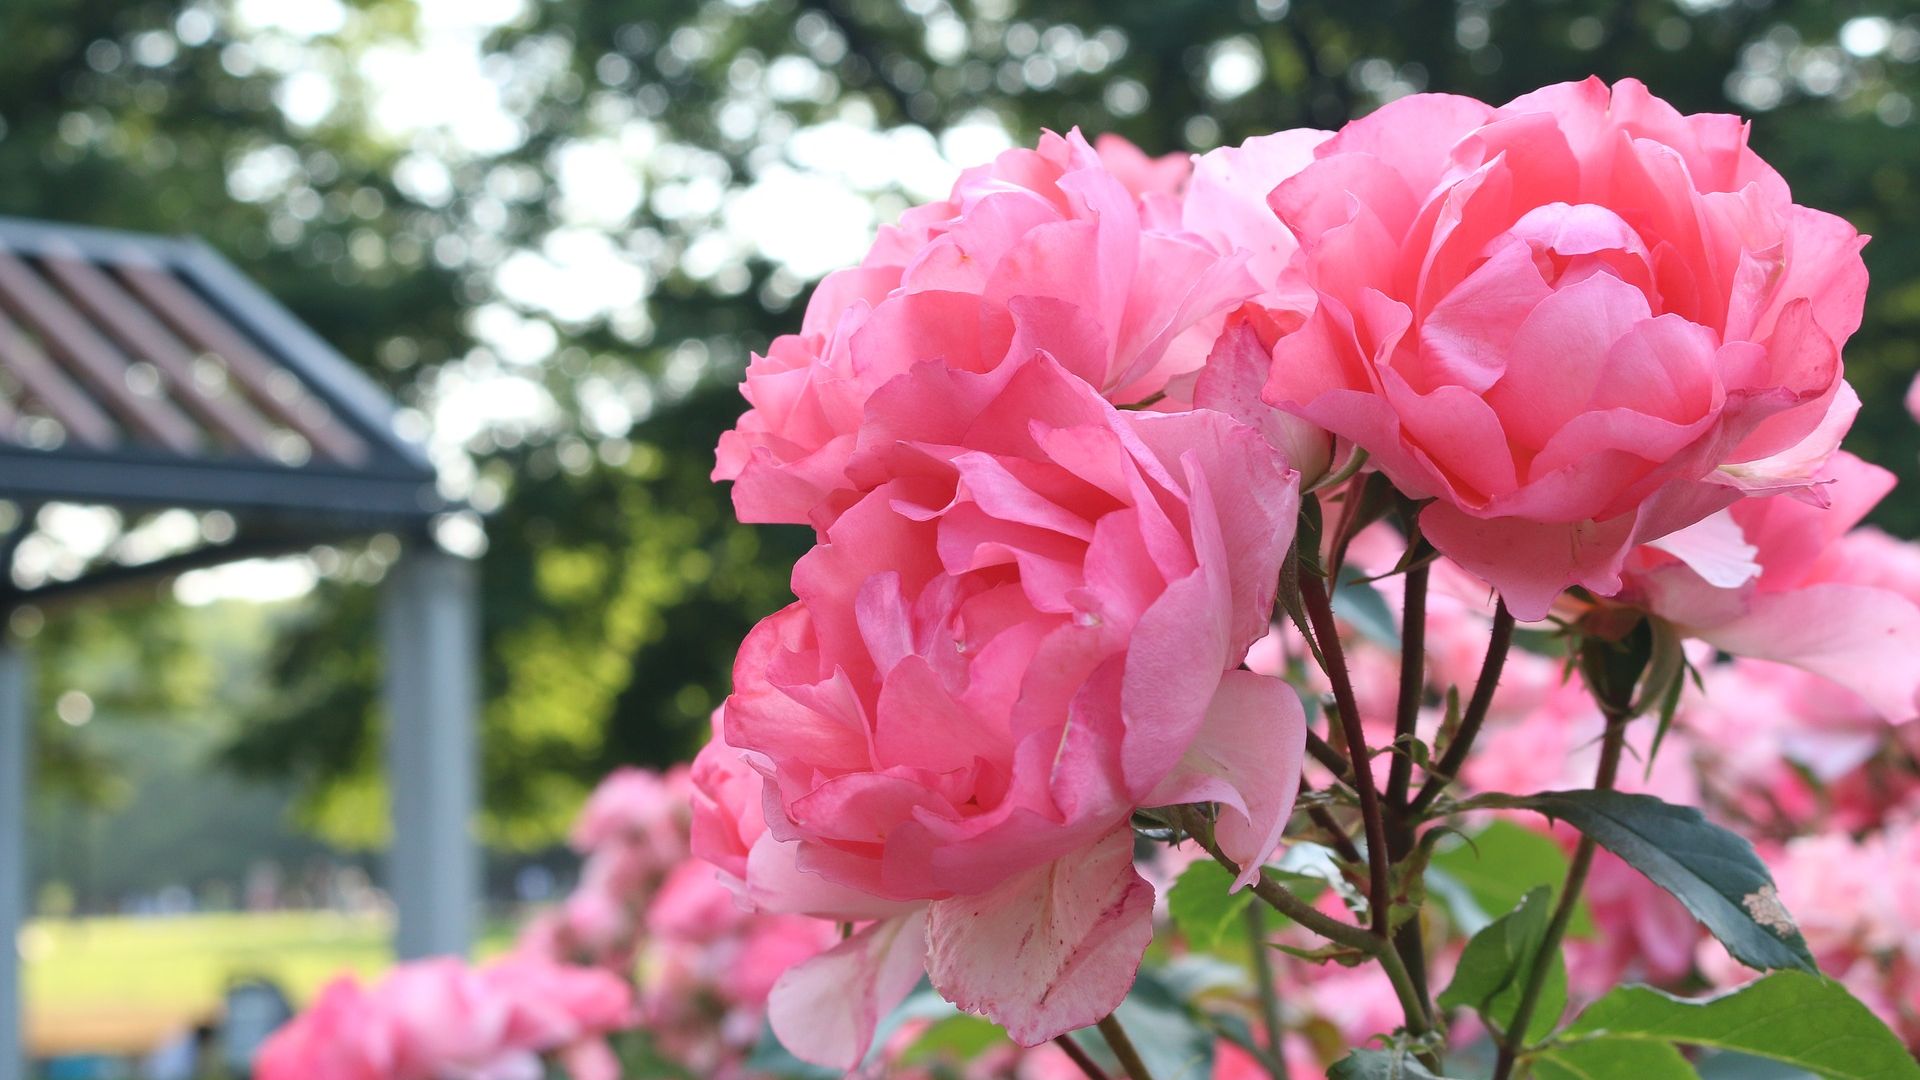 Desktop Wallpaper Rose Flowers Of Park, Hd Image, Picture, Background, Zqgc  I